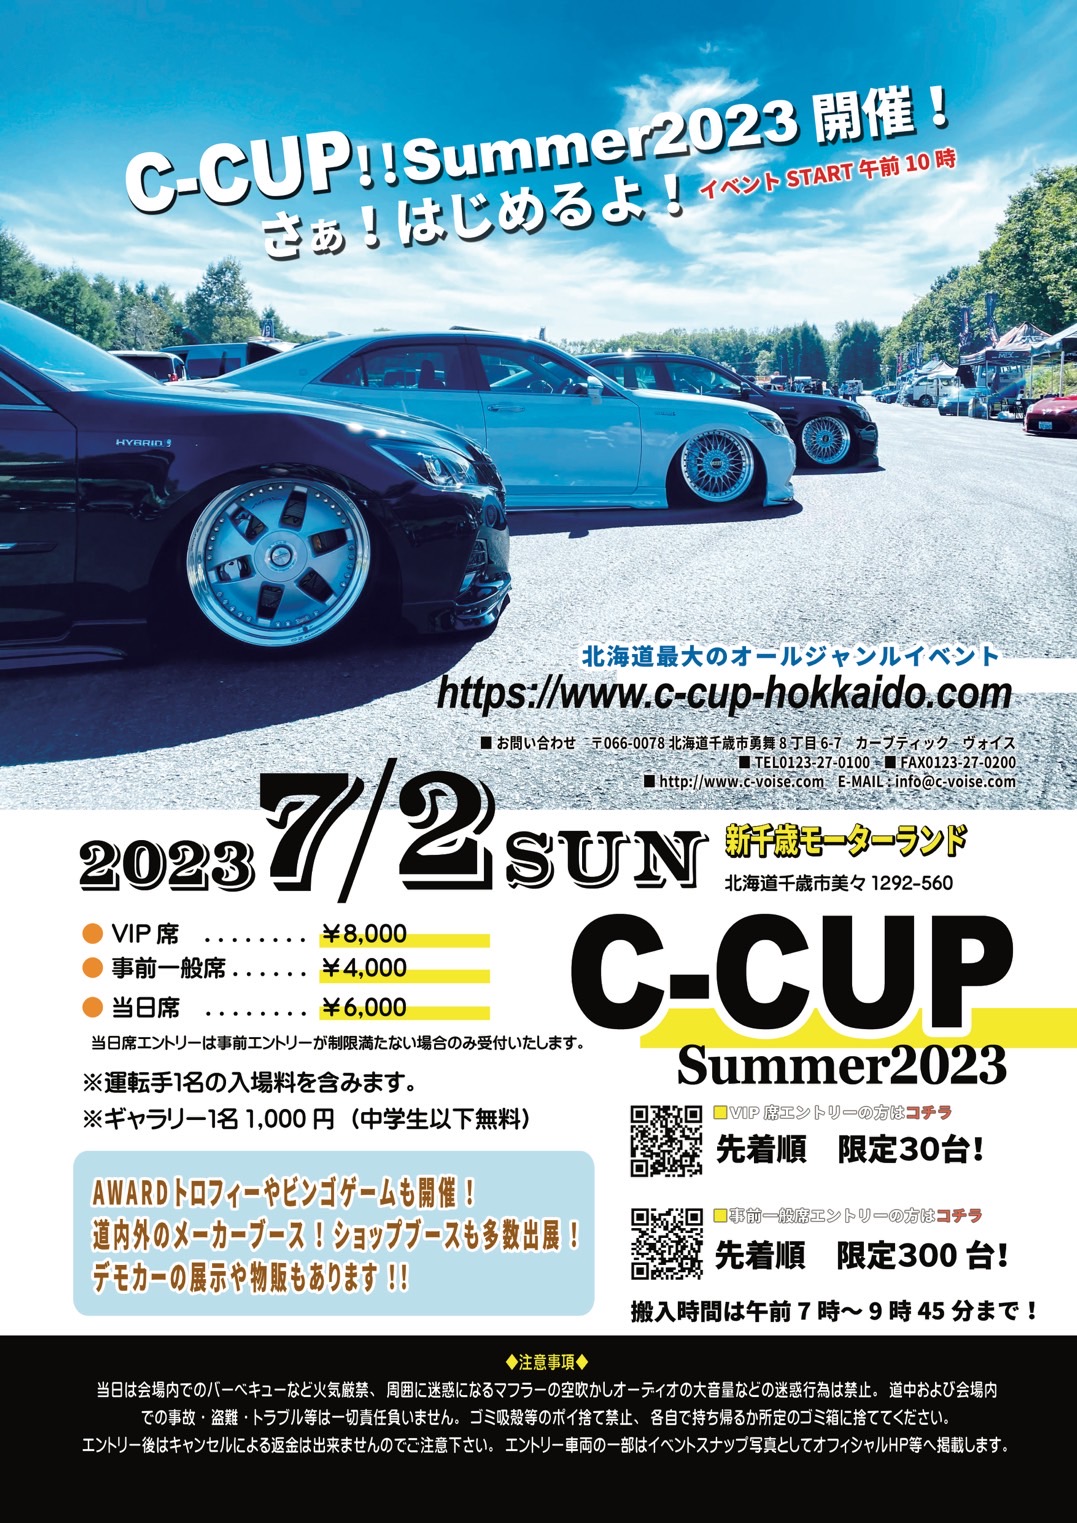 C-CUP SUMMER 2023